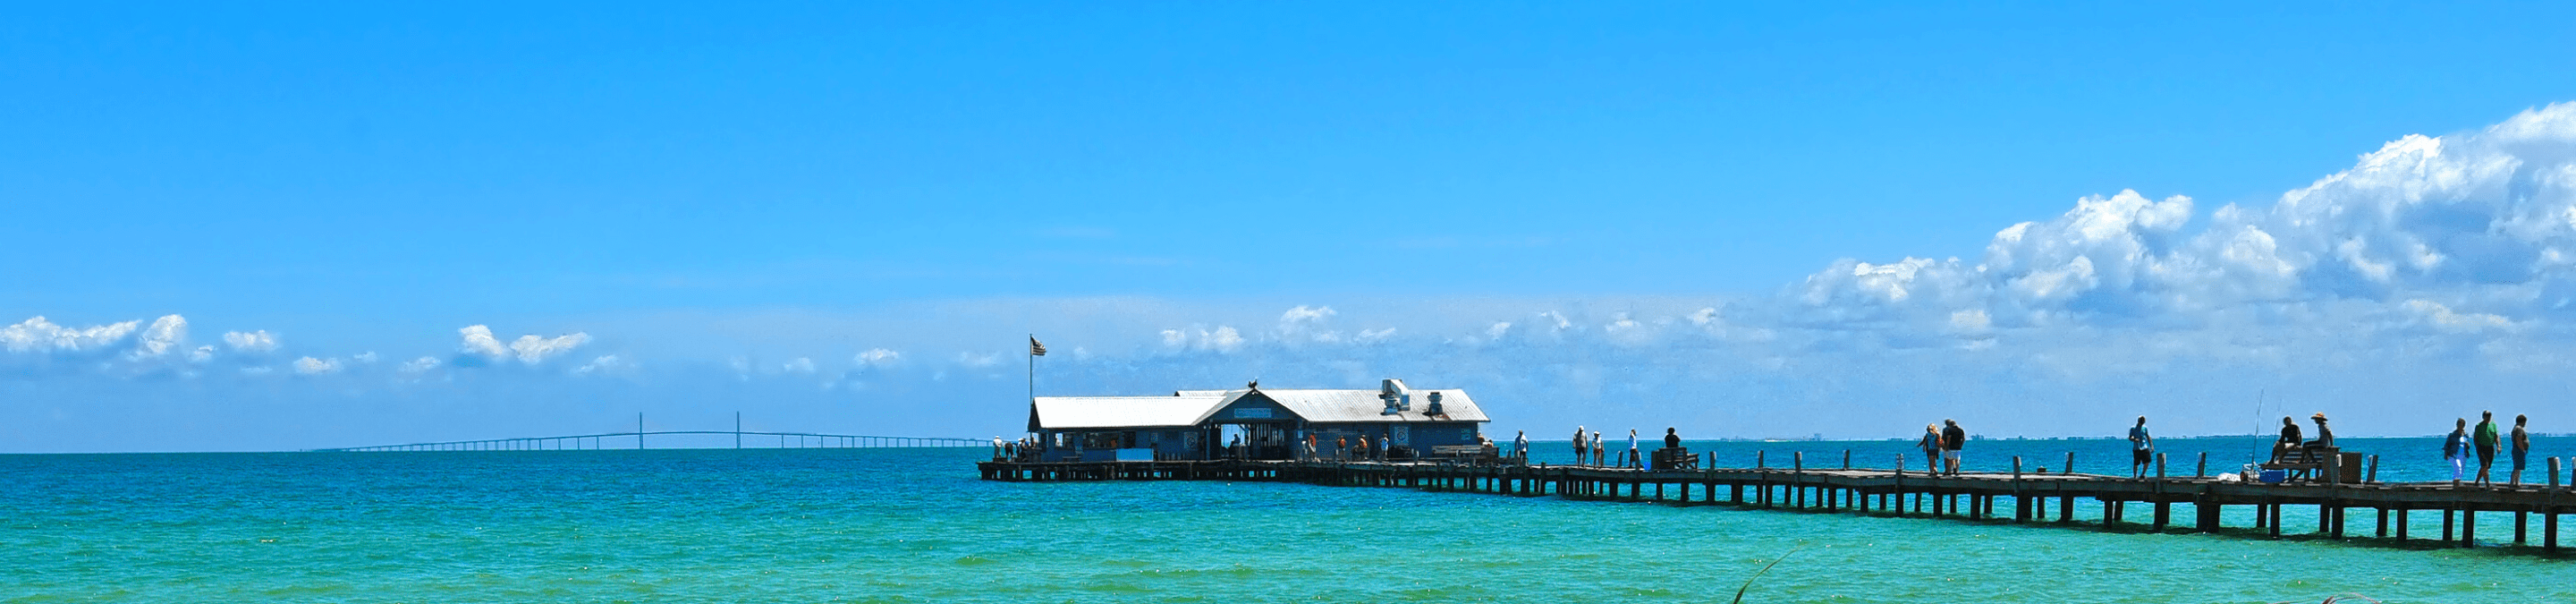 view of Anna Maria City Pier from the shore on a bright sunny day with the Skyway bridge in the background and people walking along the pier